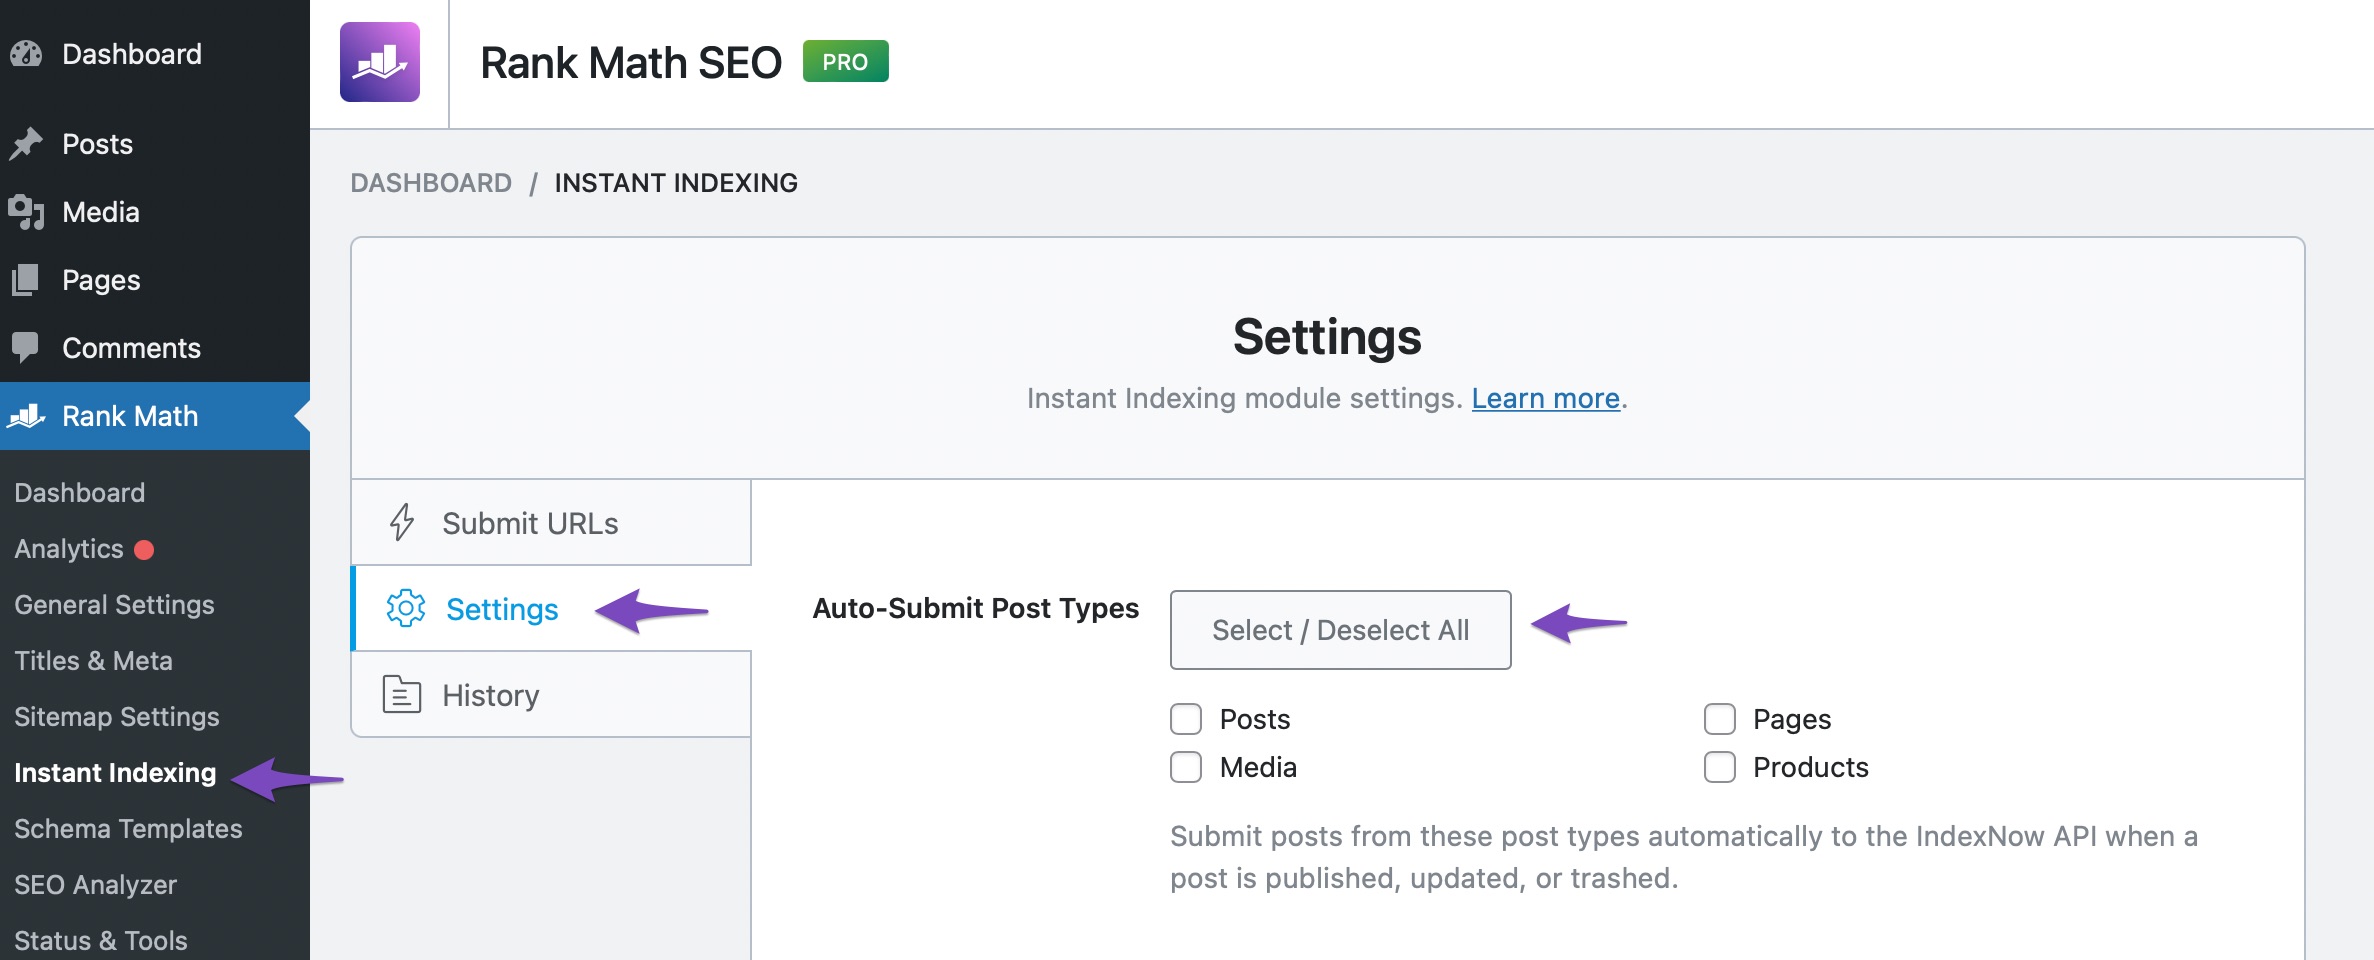 Deselect auto-submission in the Instant Indexing Settings